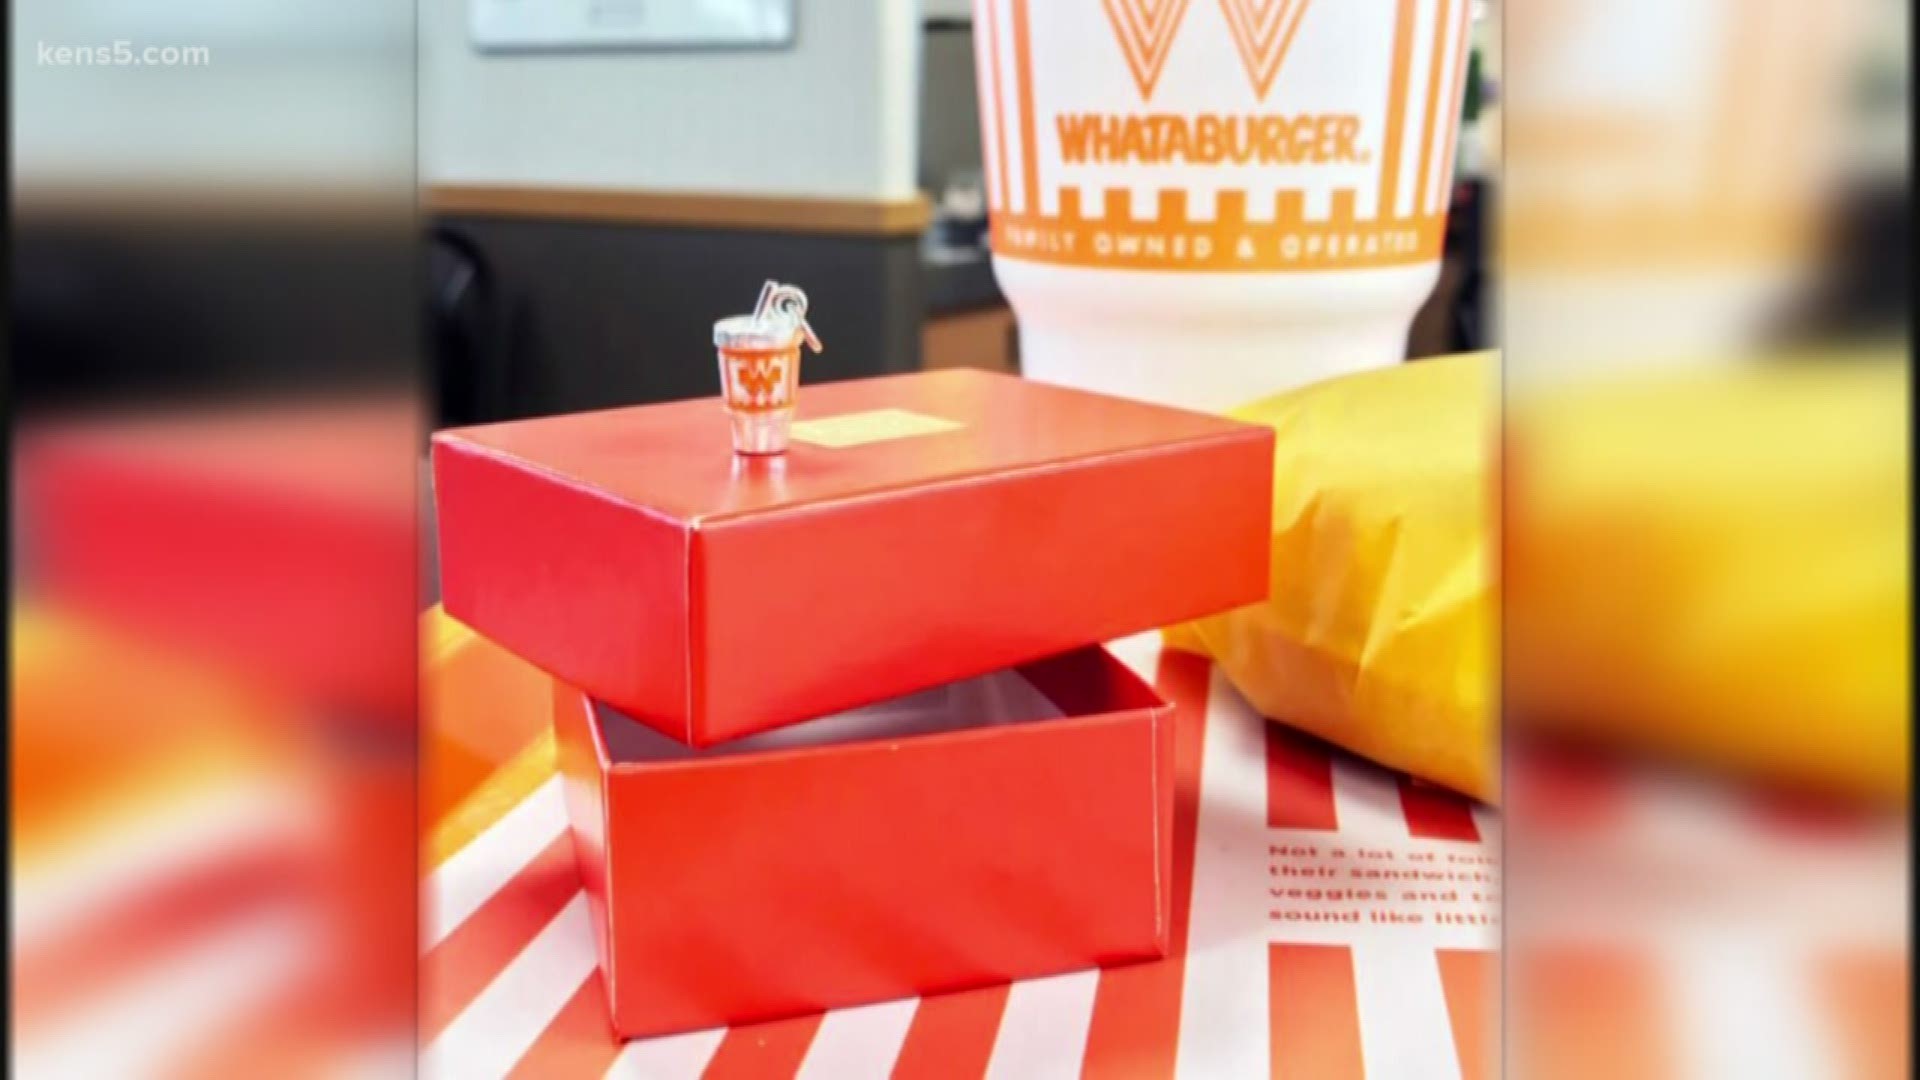 James Avery releases Whataburger french-fry charm | newscentermaine.com